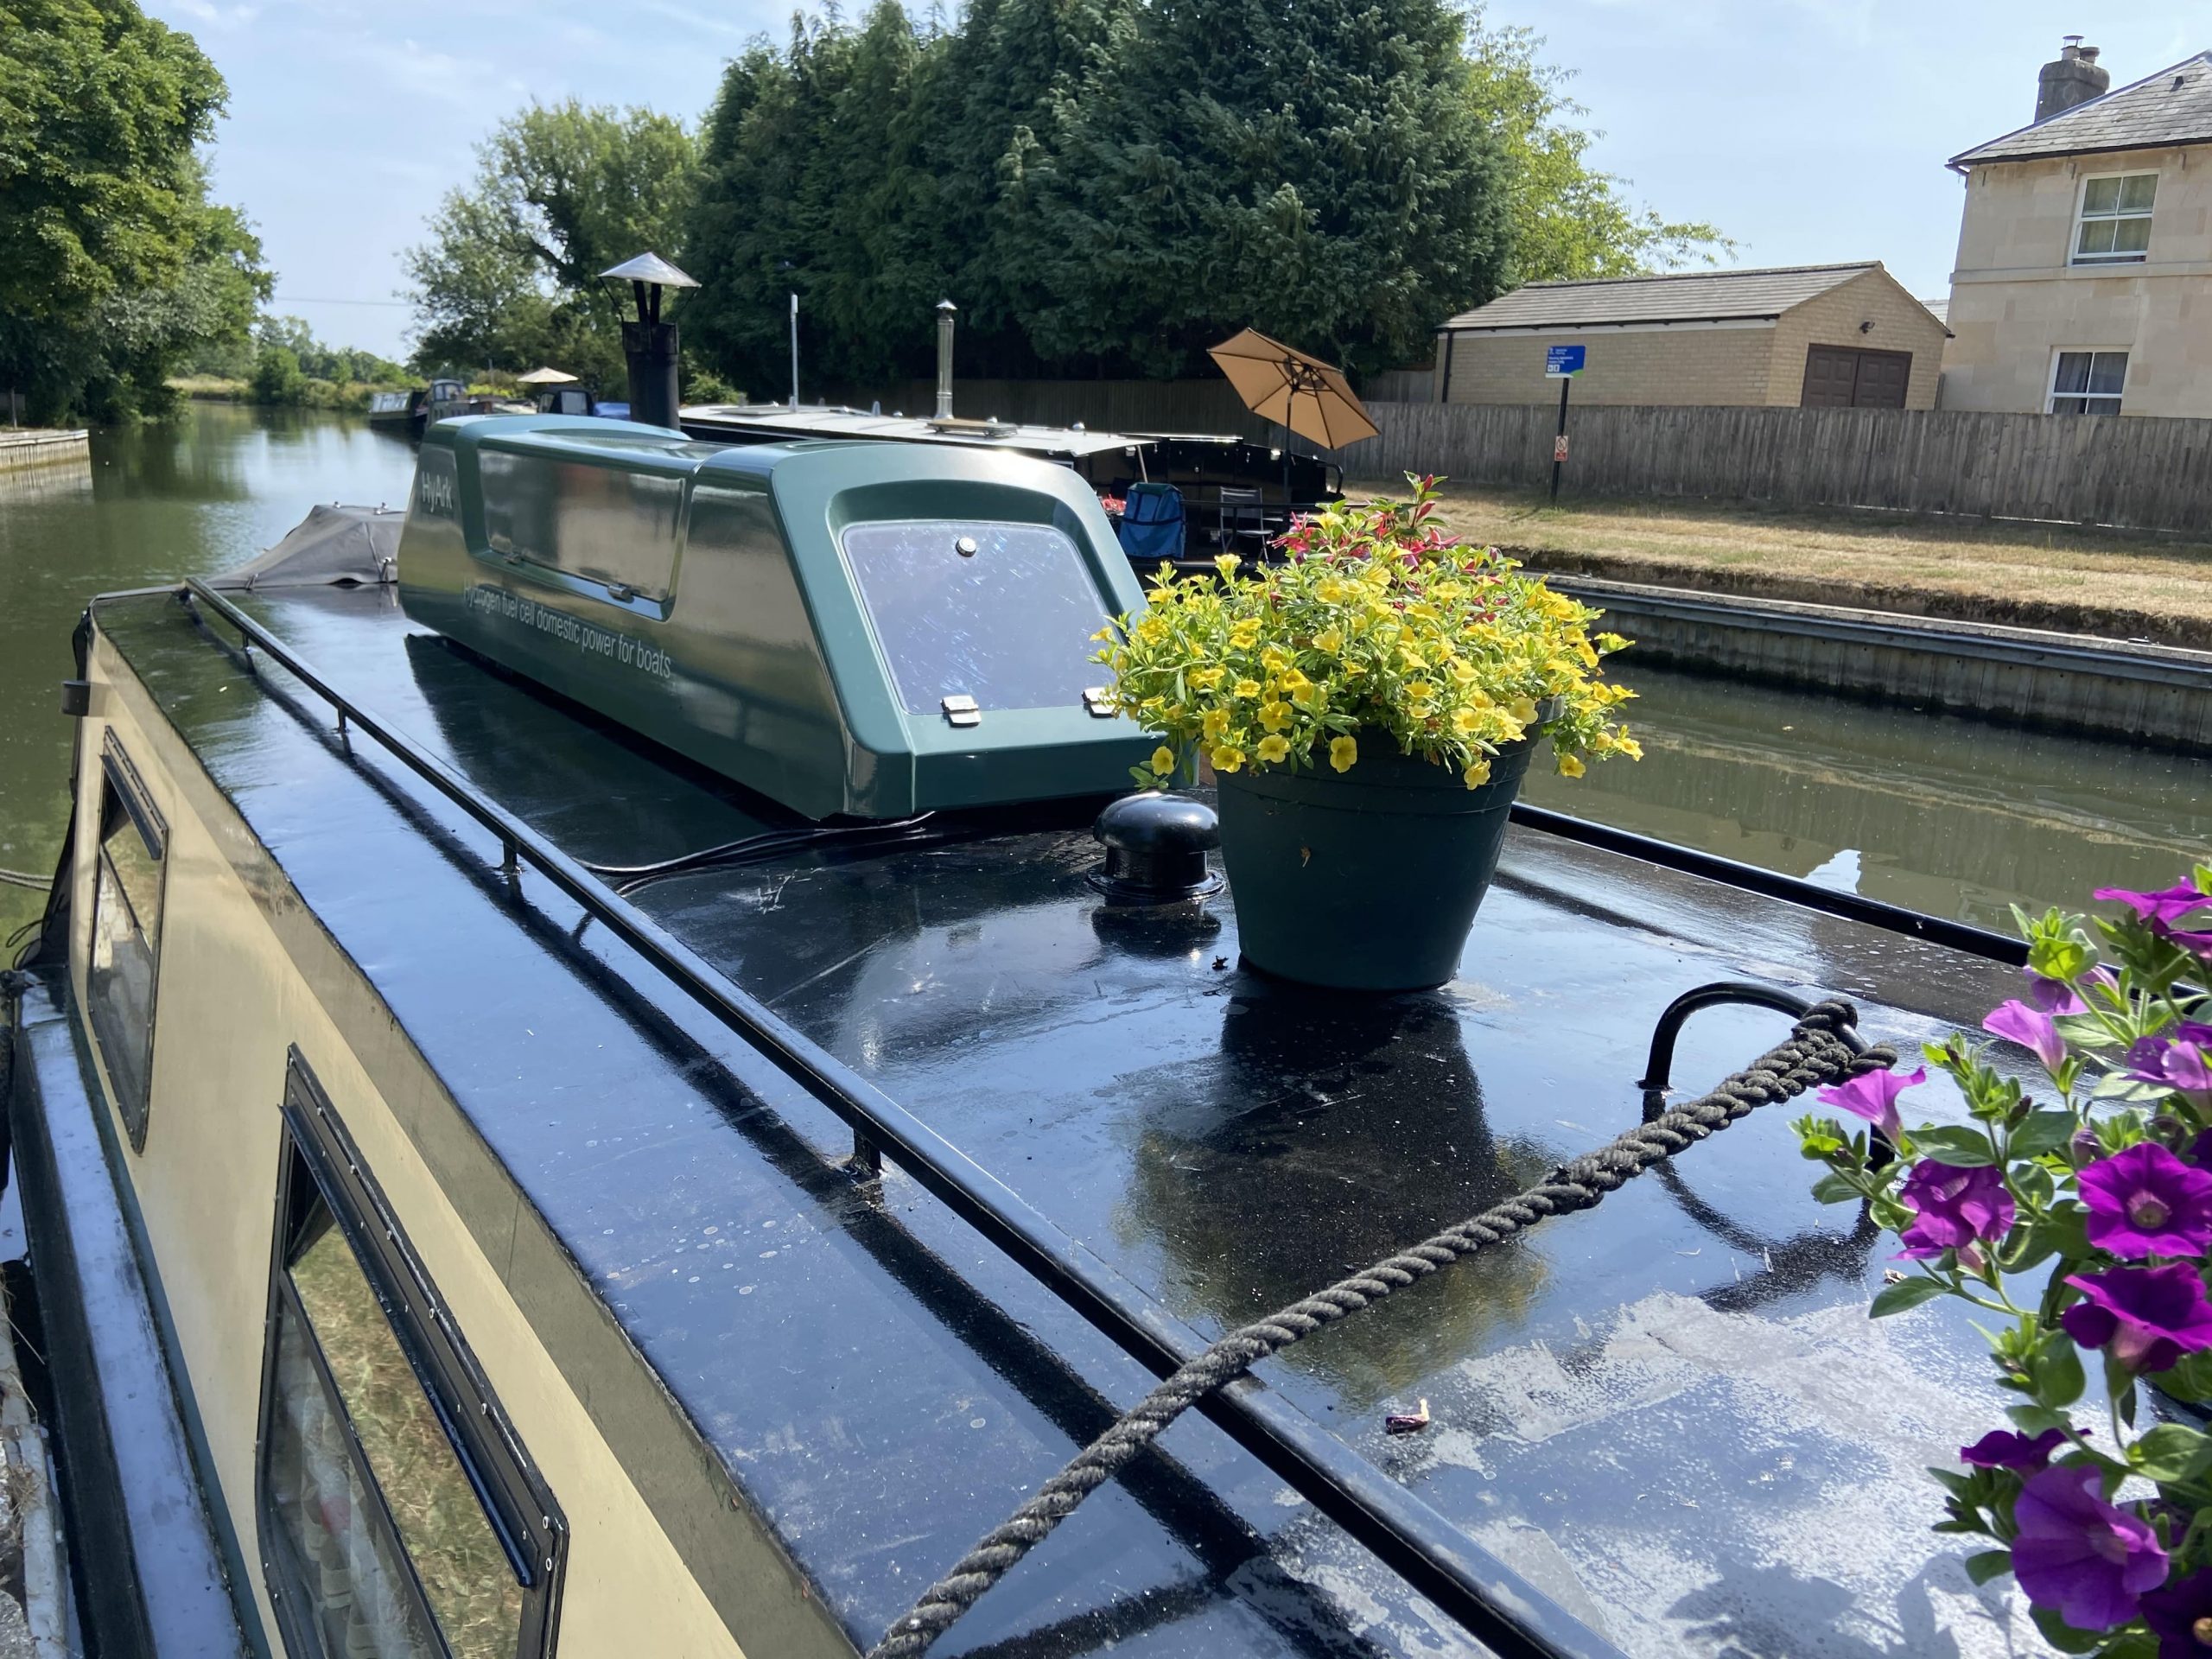 BOC: Powering Narrowboats with Hydrogen